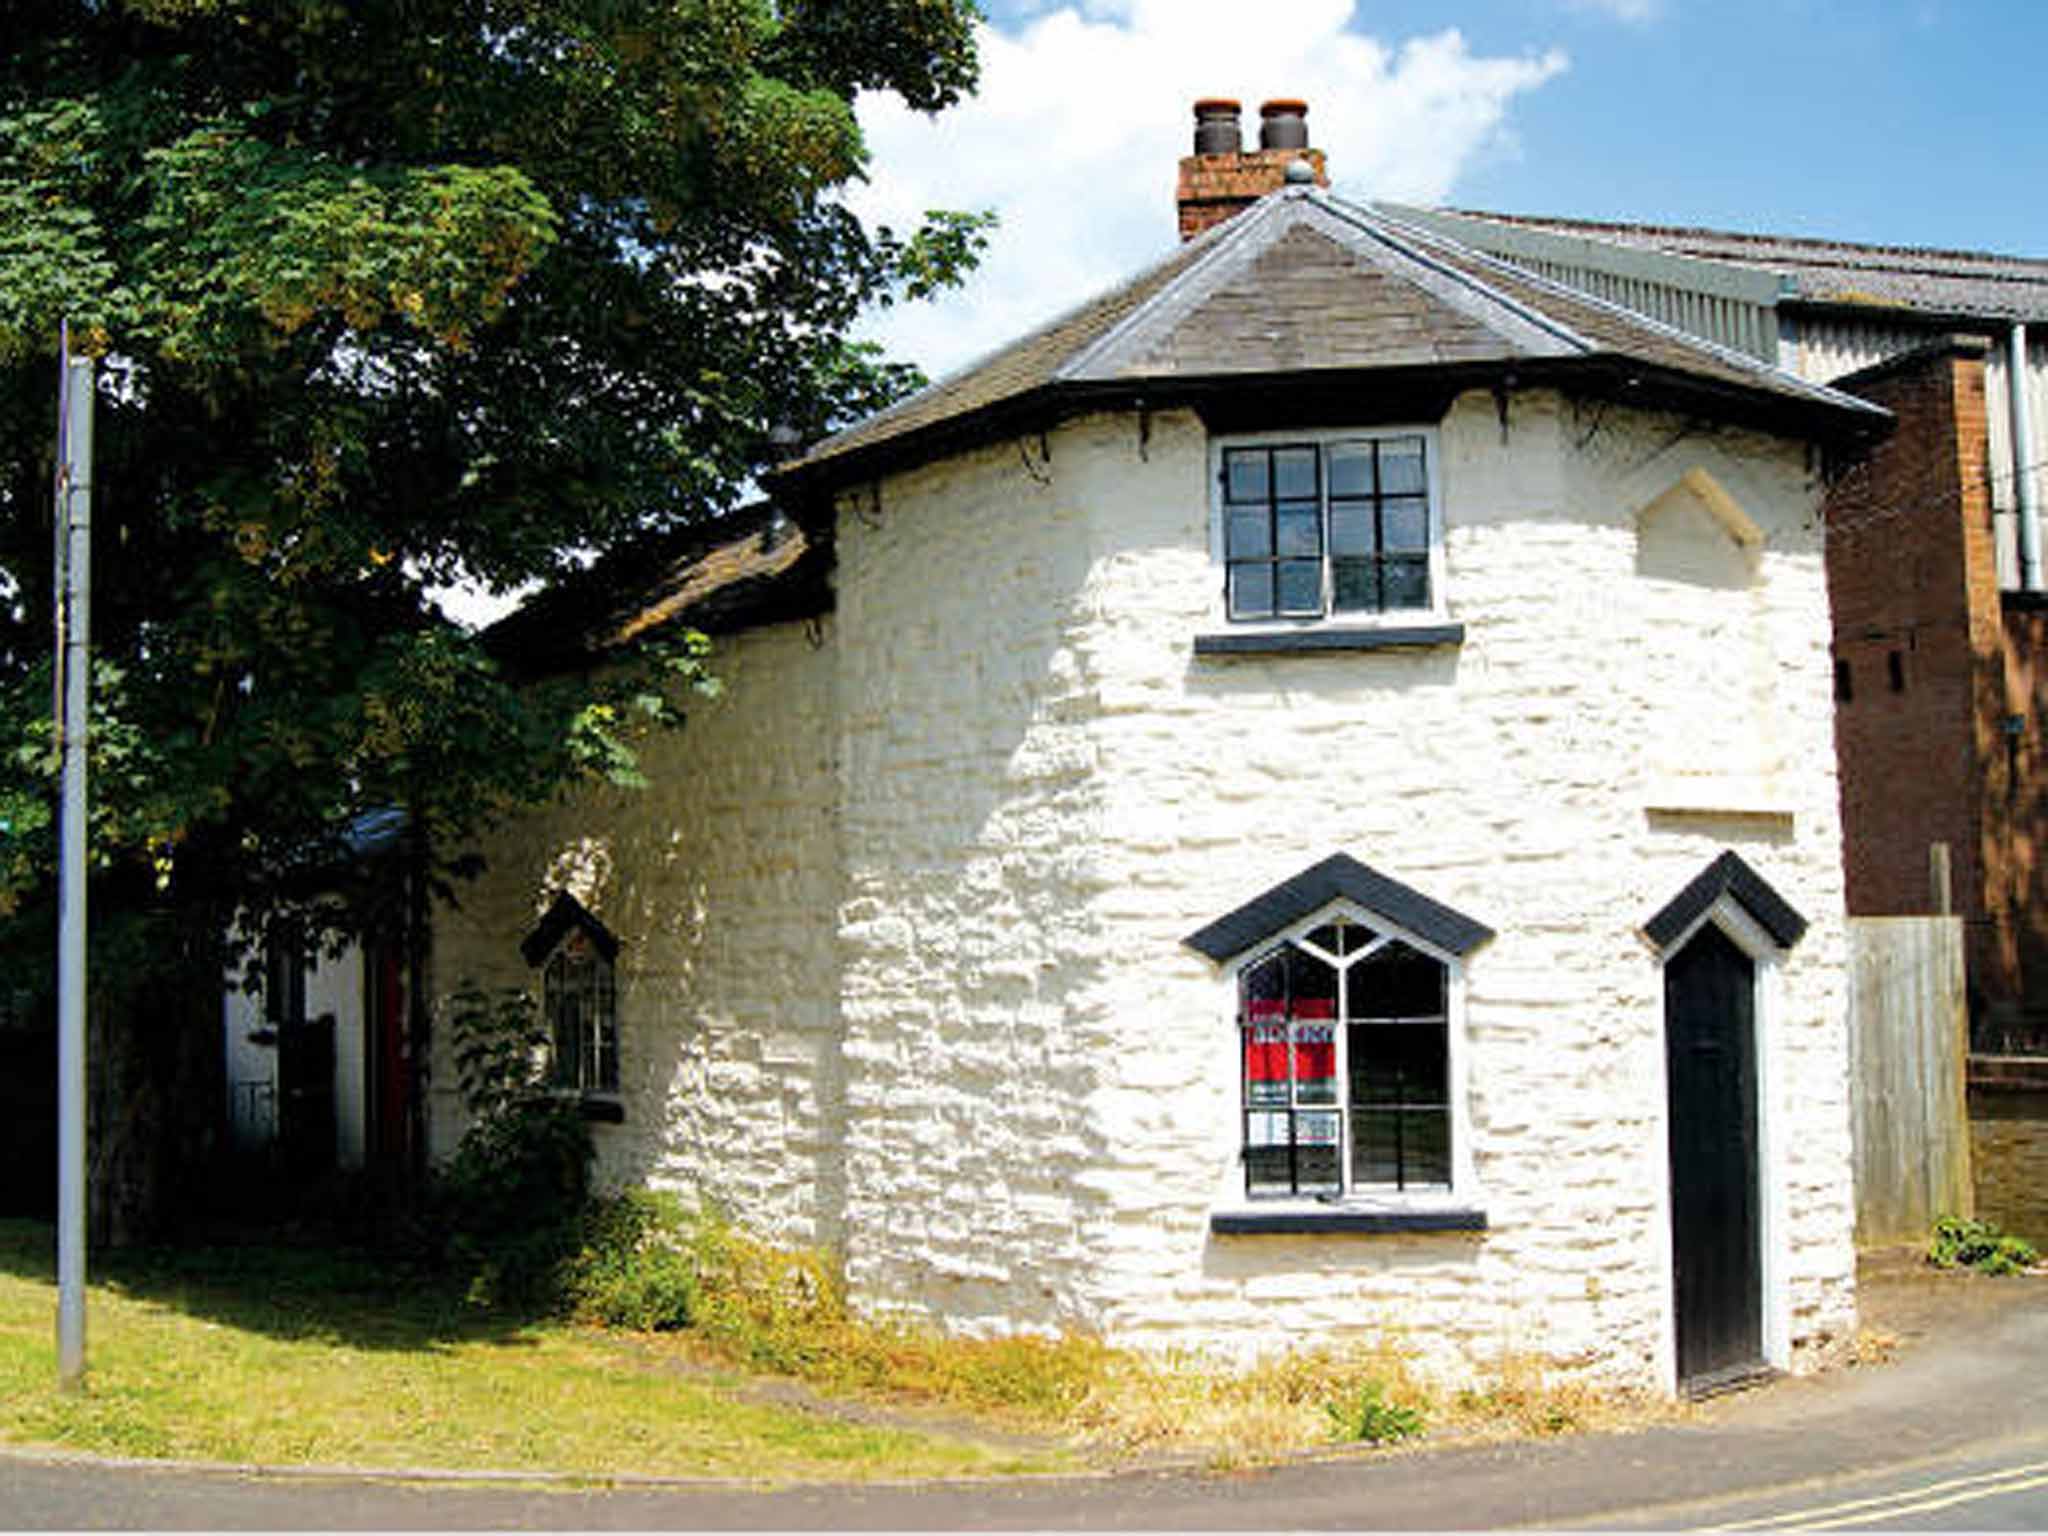 One bedroom property for sale by auction on July 17 2014: The Toll House, 47 Temeside, Shropshire SY8, on with Allsop at a guide price of £75,000